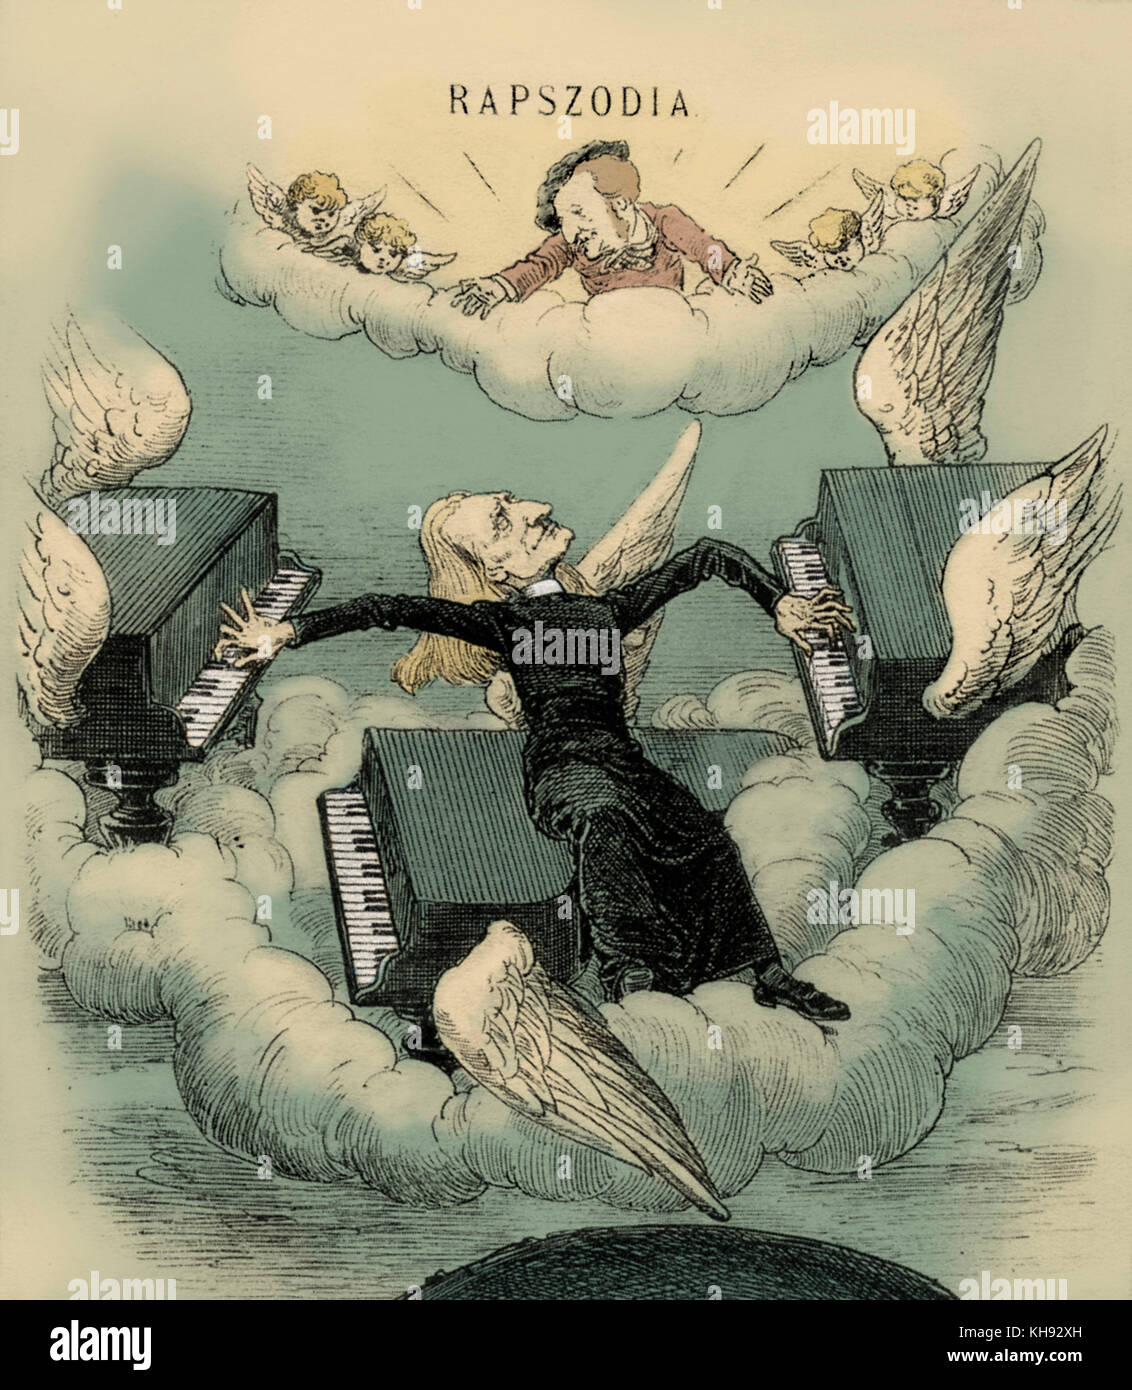 'Rhapsody' - Franz Liszt caricature.  Showing Liszt at piano, with Wagner above encouraging Saint Peter to let him into heaven.'Saint Pierre, ouvrez vite la porte du paradis!'  Published in Borsszem Janko, 8 August 1886.    FL:  Hungarian pianist and composer,  22 October 1811 - 31 July 1886. RW: German composer & author, 22 May 1813 - 13 February 1883. Stock Photo